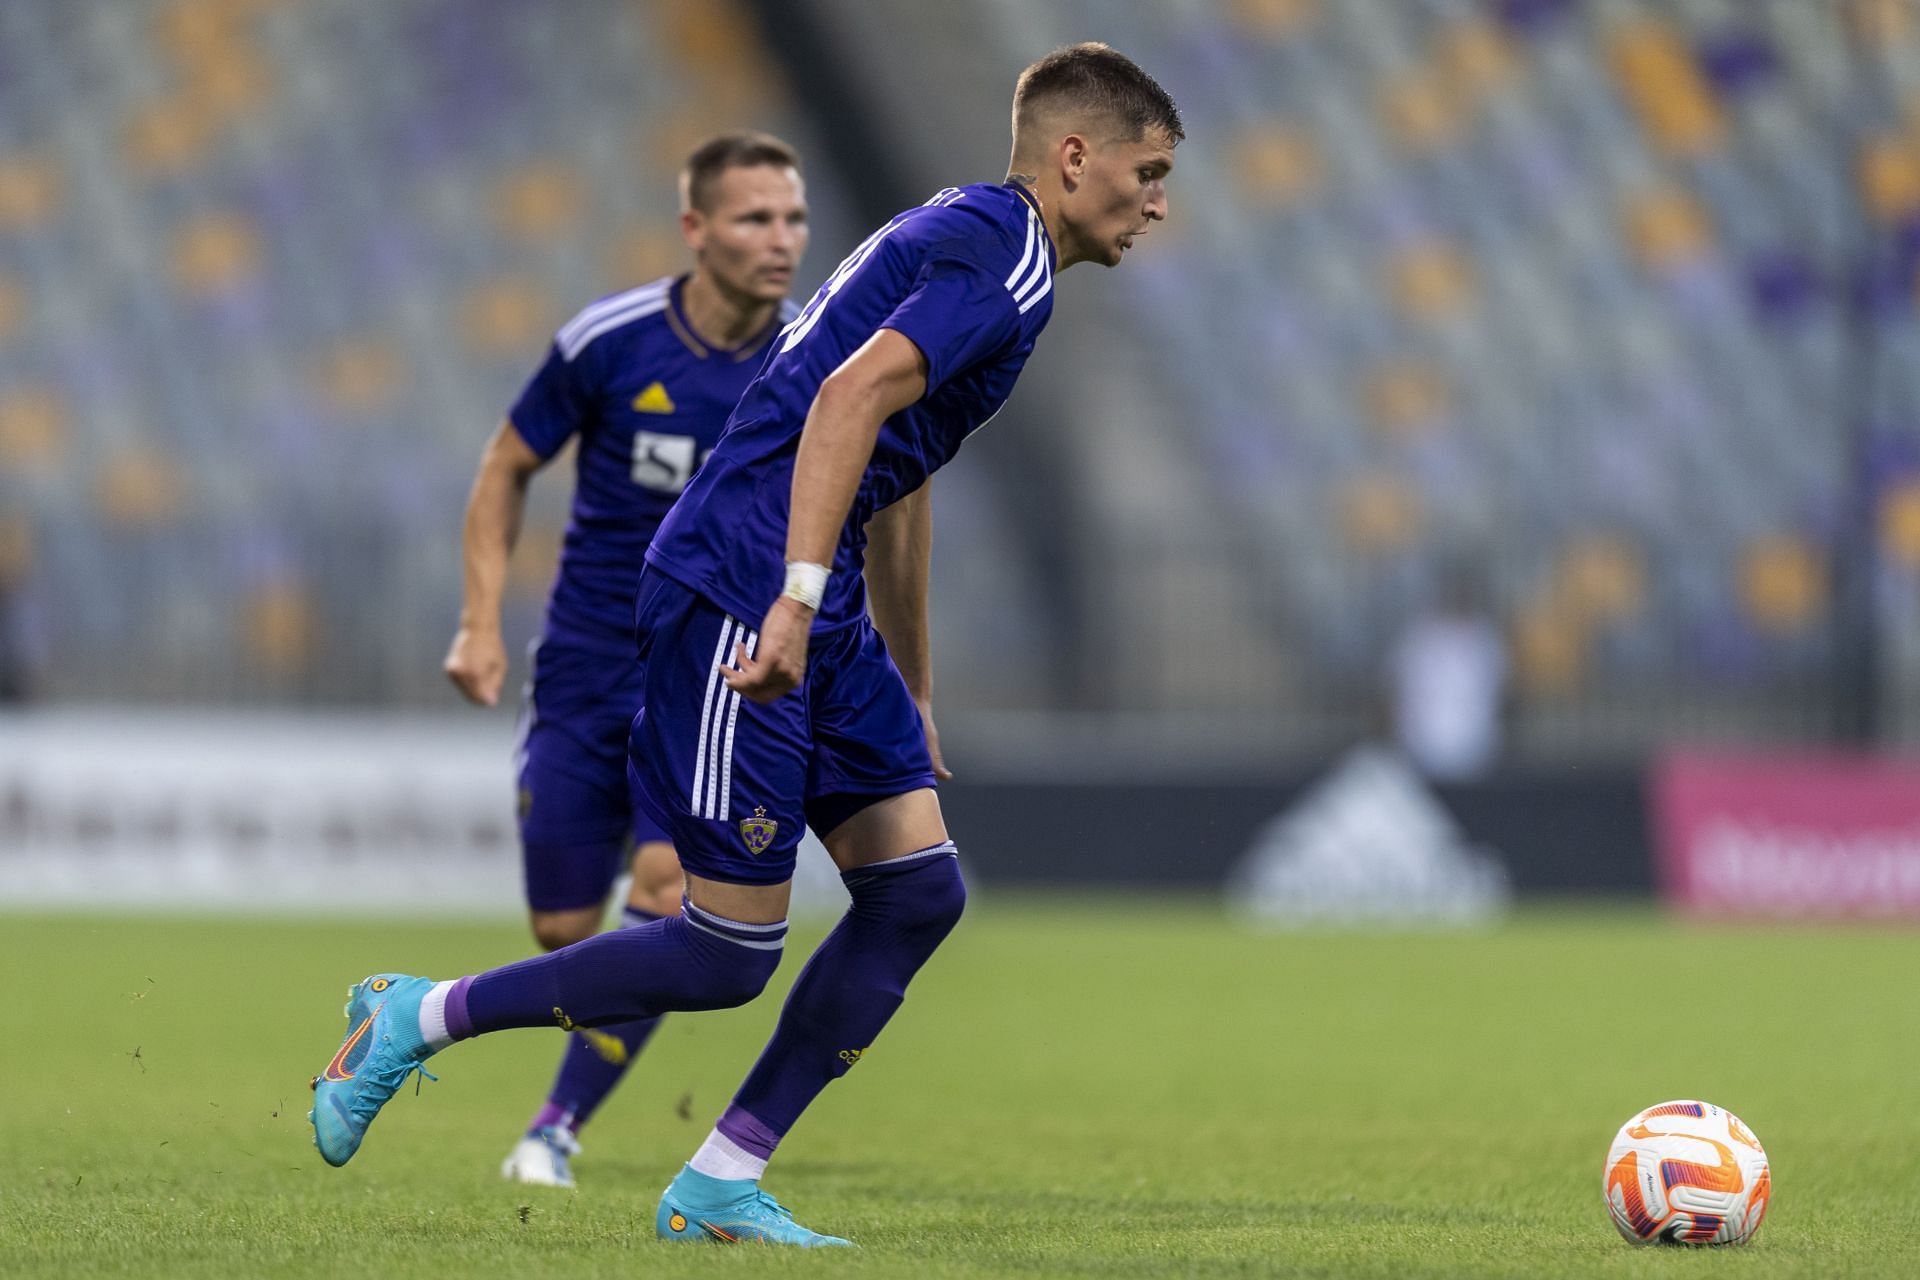 NK Maribor will face HJK in their Europa League qualifying fixture on Thursday